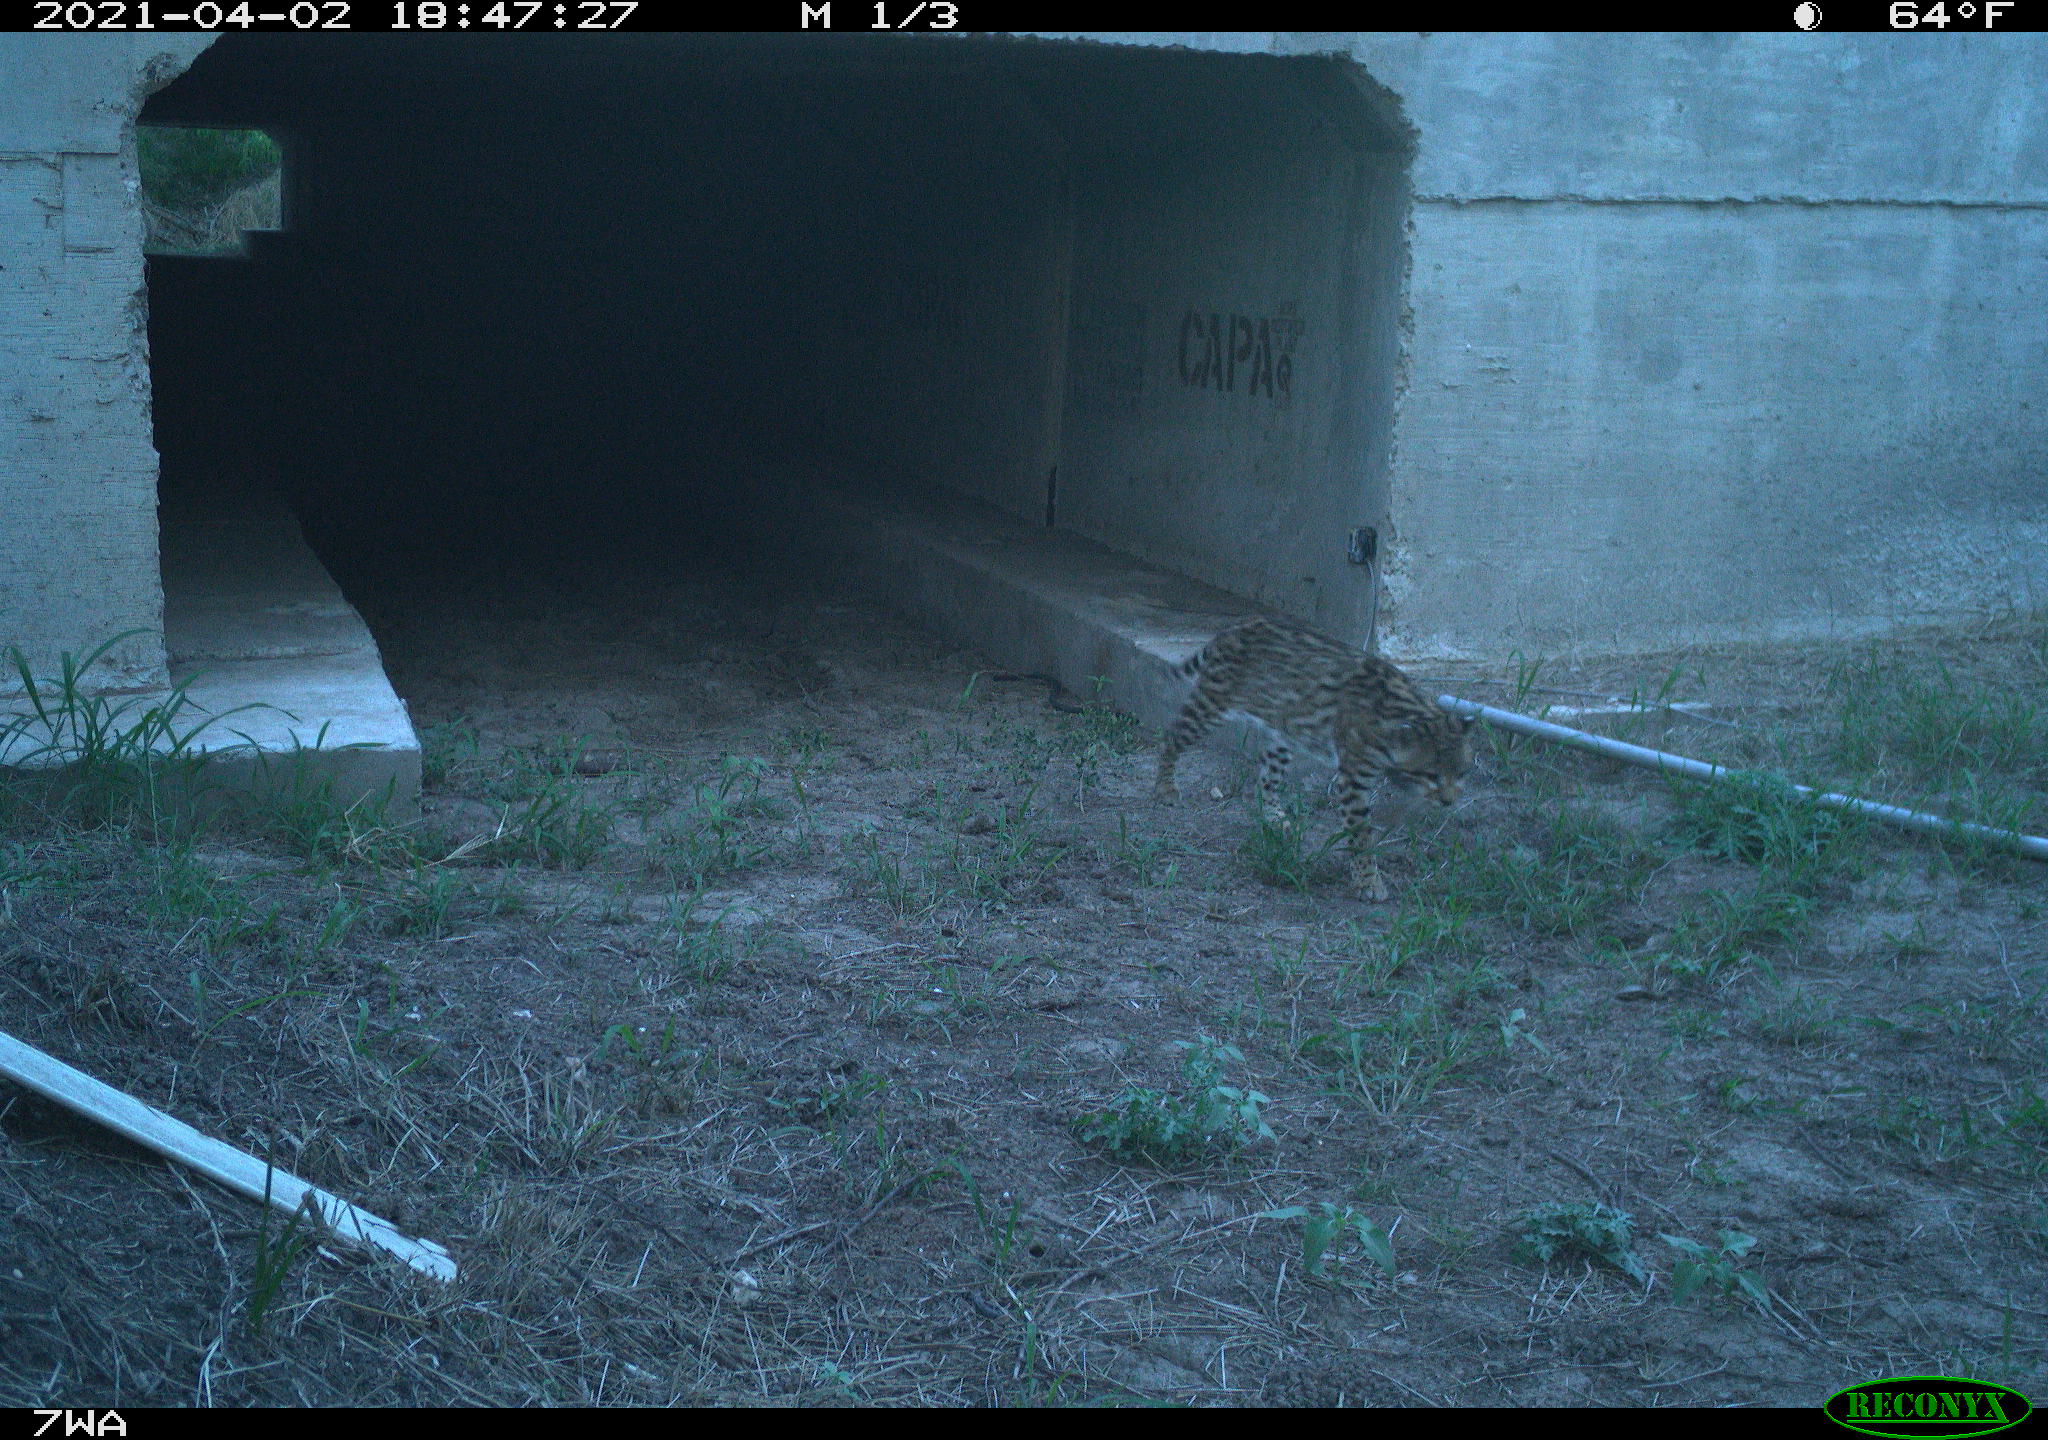 A small spotted cat--hard to see against the foreground-emerges from a highway underpass.